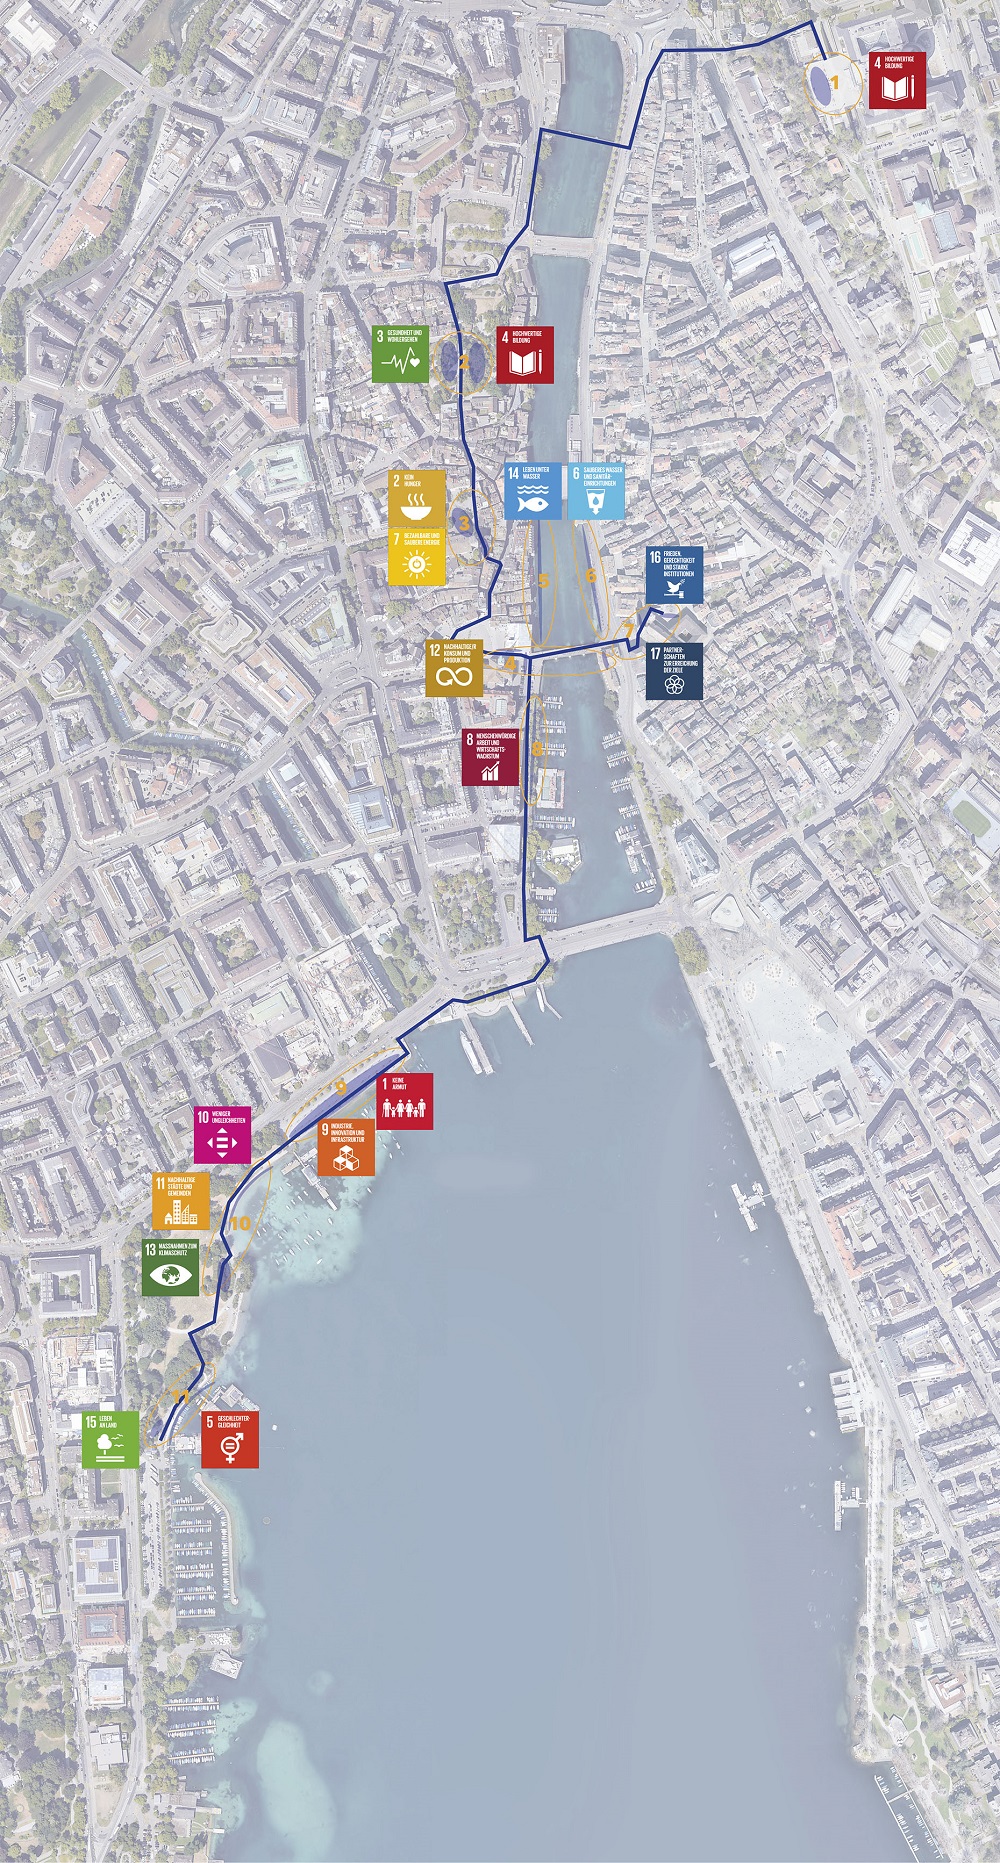 SDG exhibition locations in the heart of Zurich: A parcours from ETH Polyterrace to the port of Enge